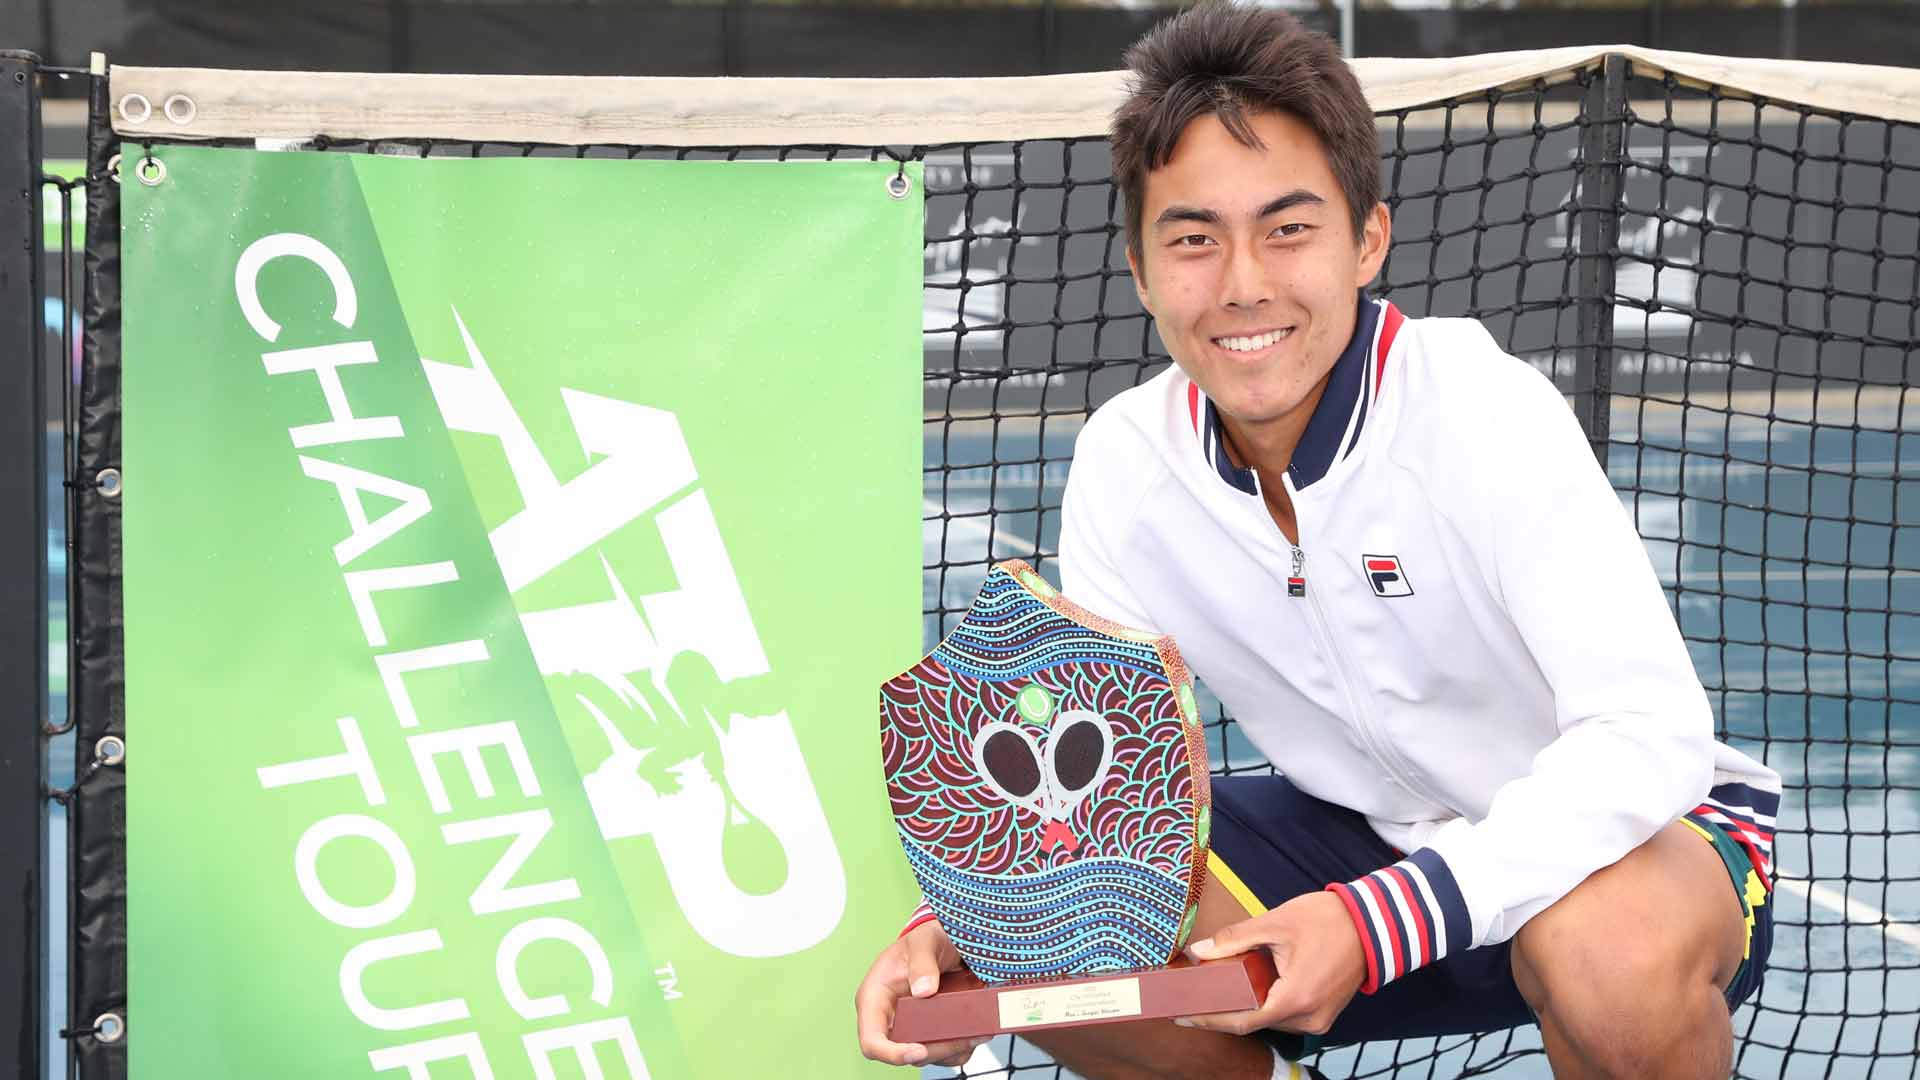 <a href='https://www.atptour.com/en/players/rinky-hijikata/h0bh/overview'>Rinky Hijikata</a> wins the Playford Challenger.